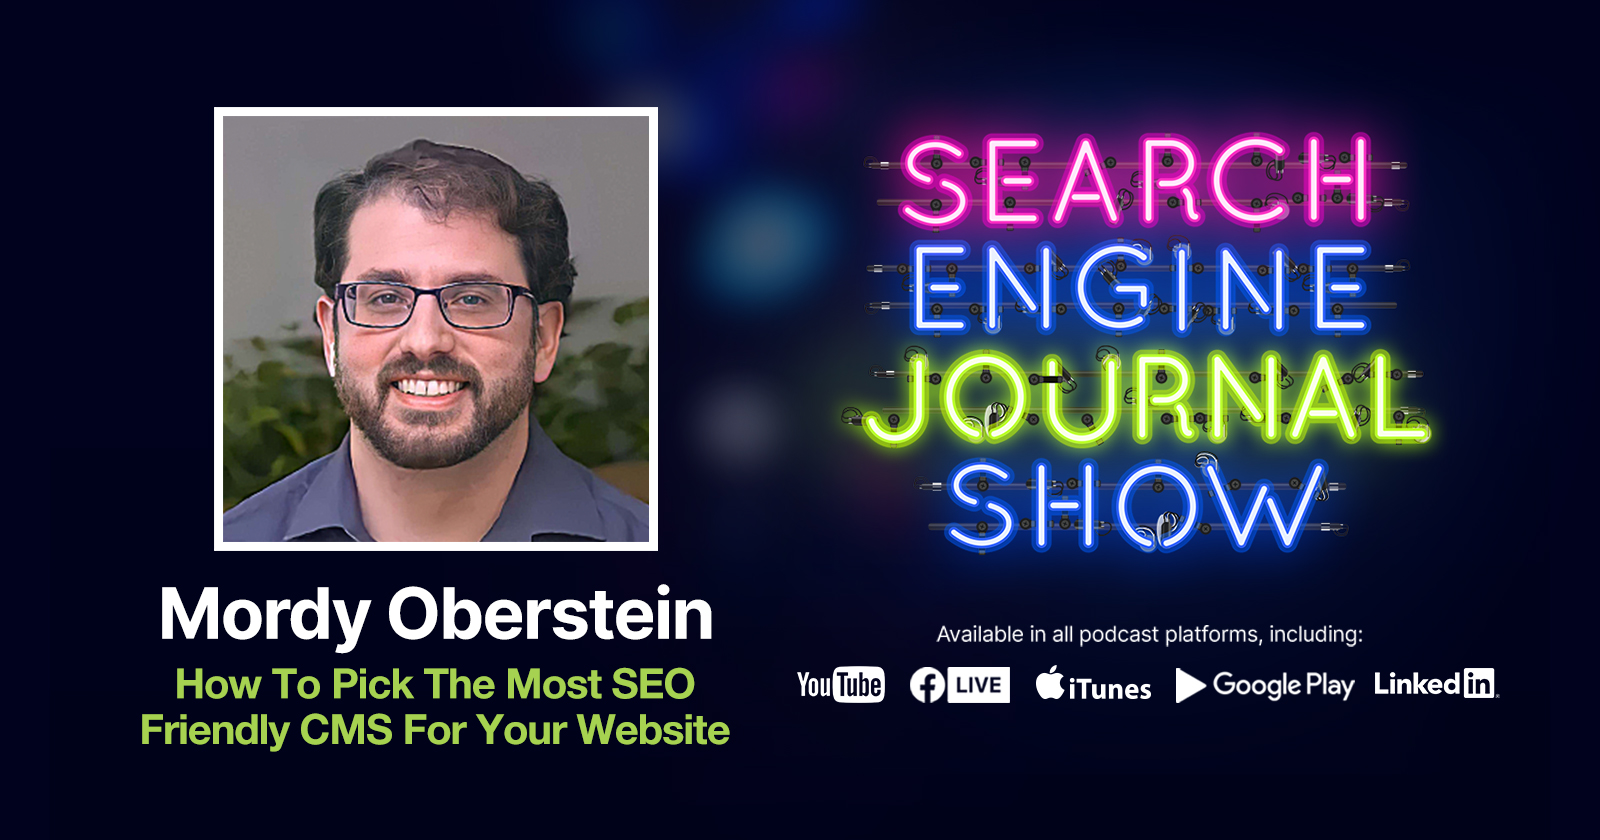 TLD Experimentation & Authority Building with Publishing and SEO [Podcast]